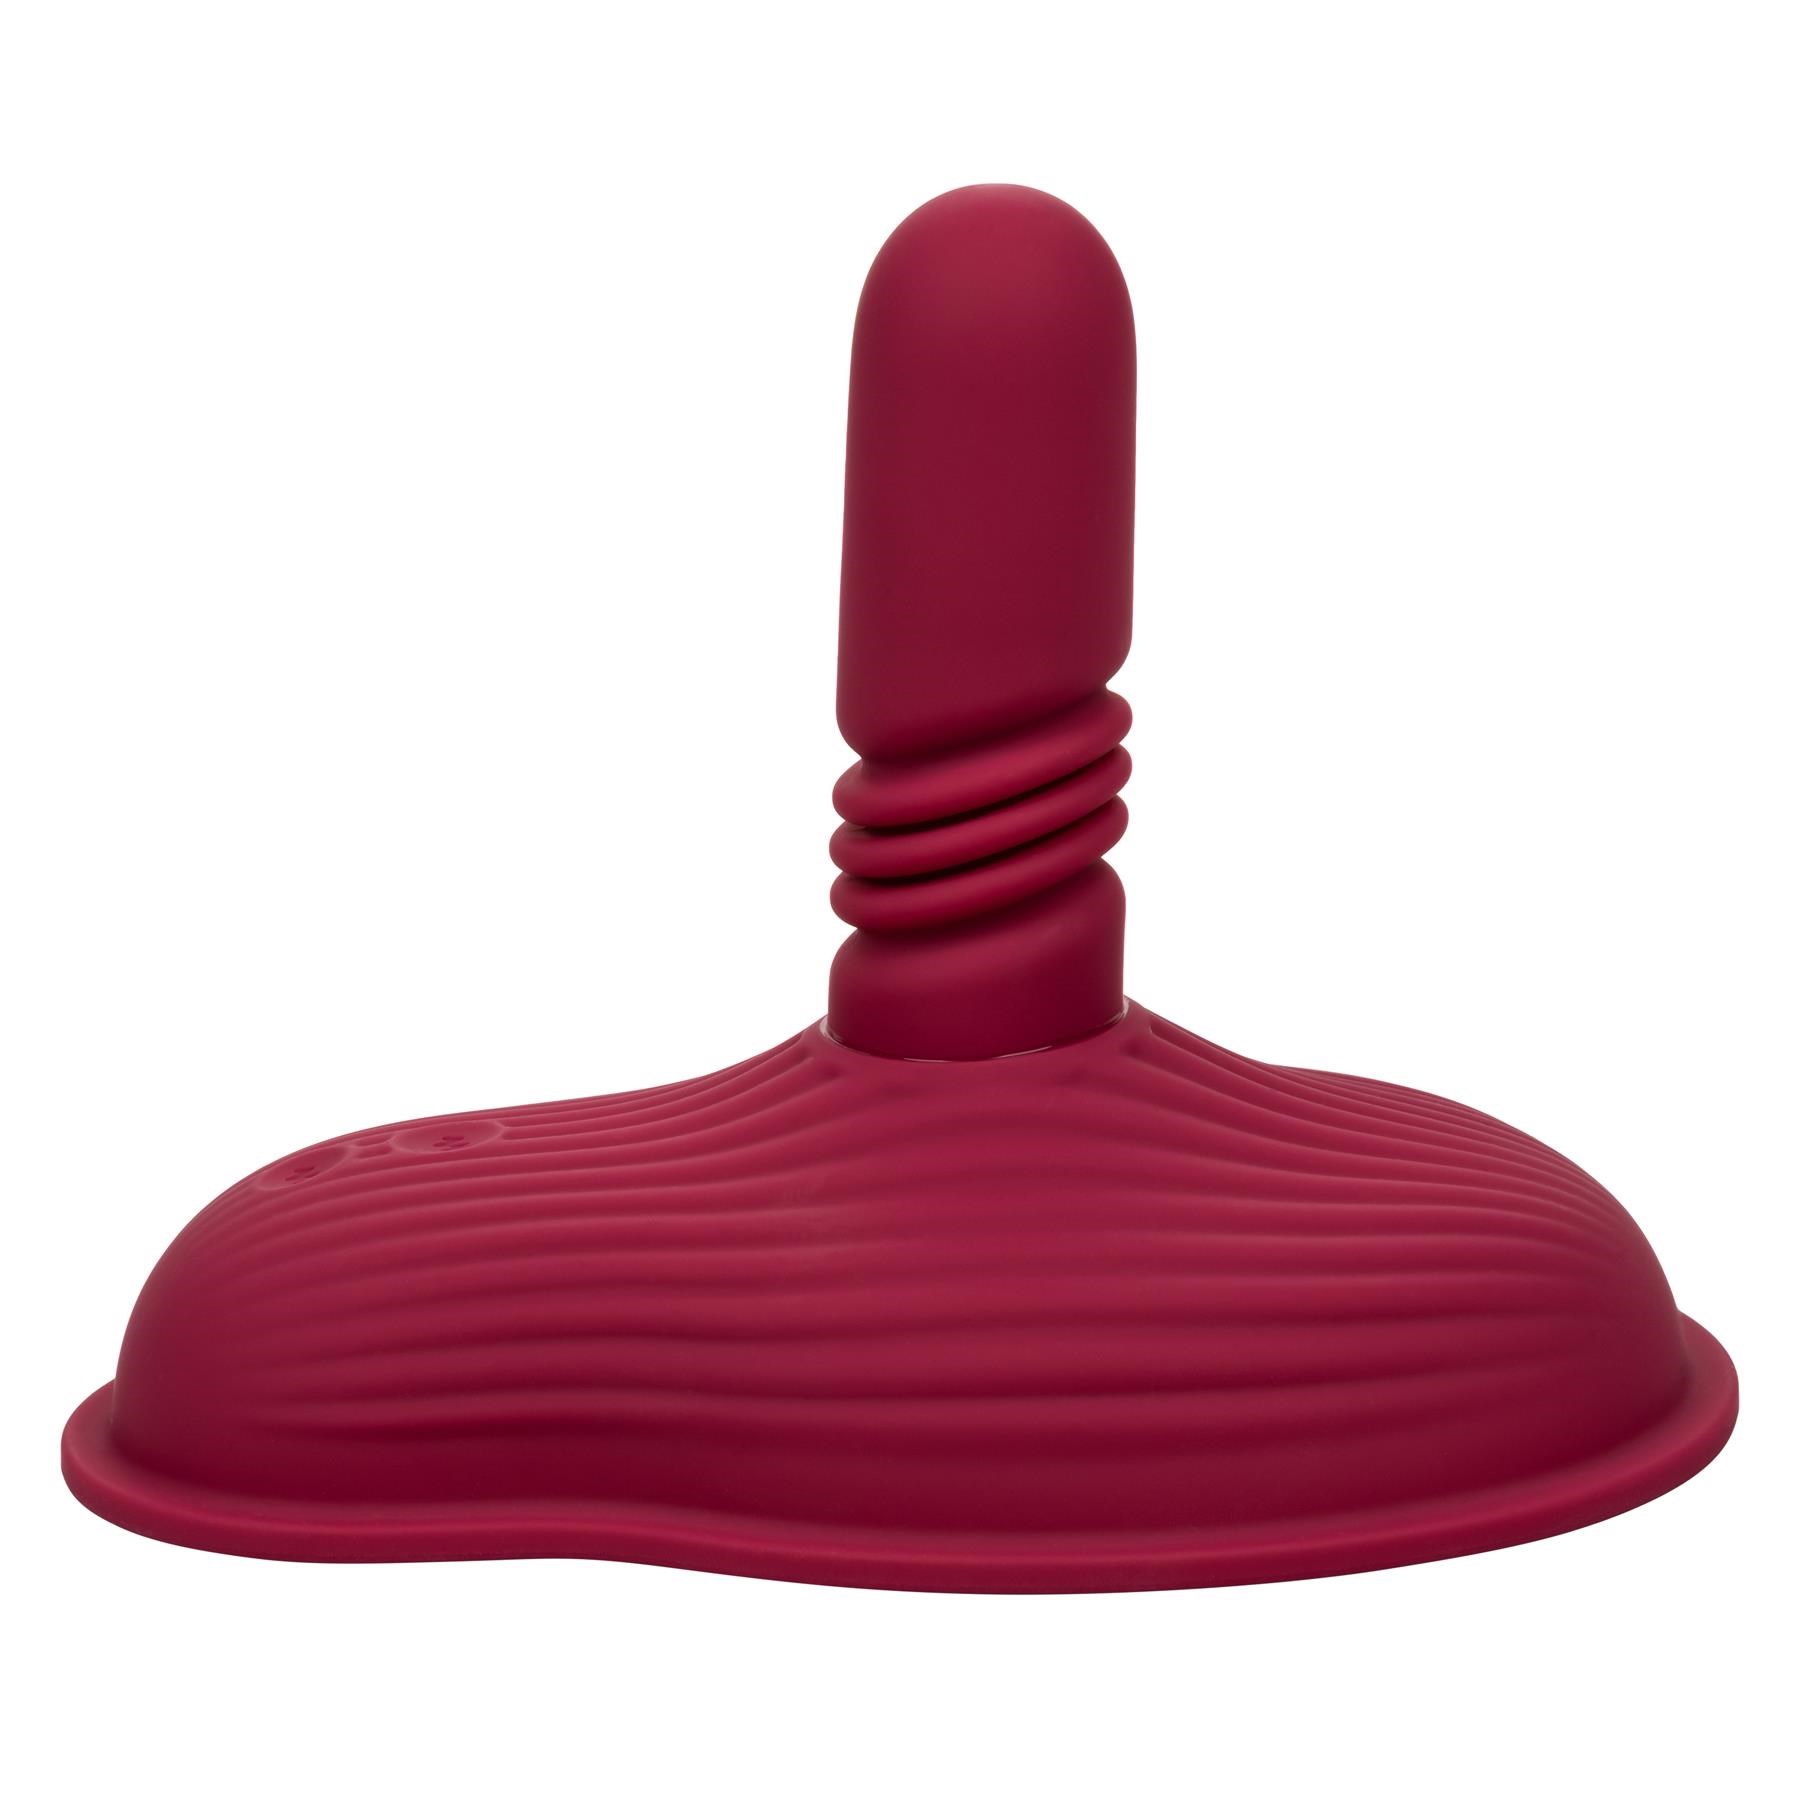 Dual Rider Thrust And Grind Vibrator - Product Shot #4